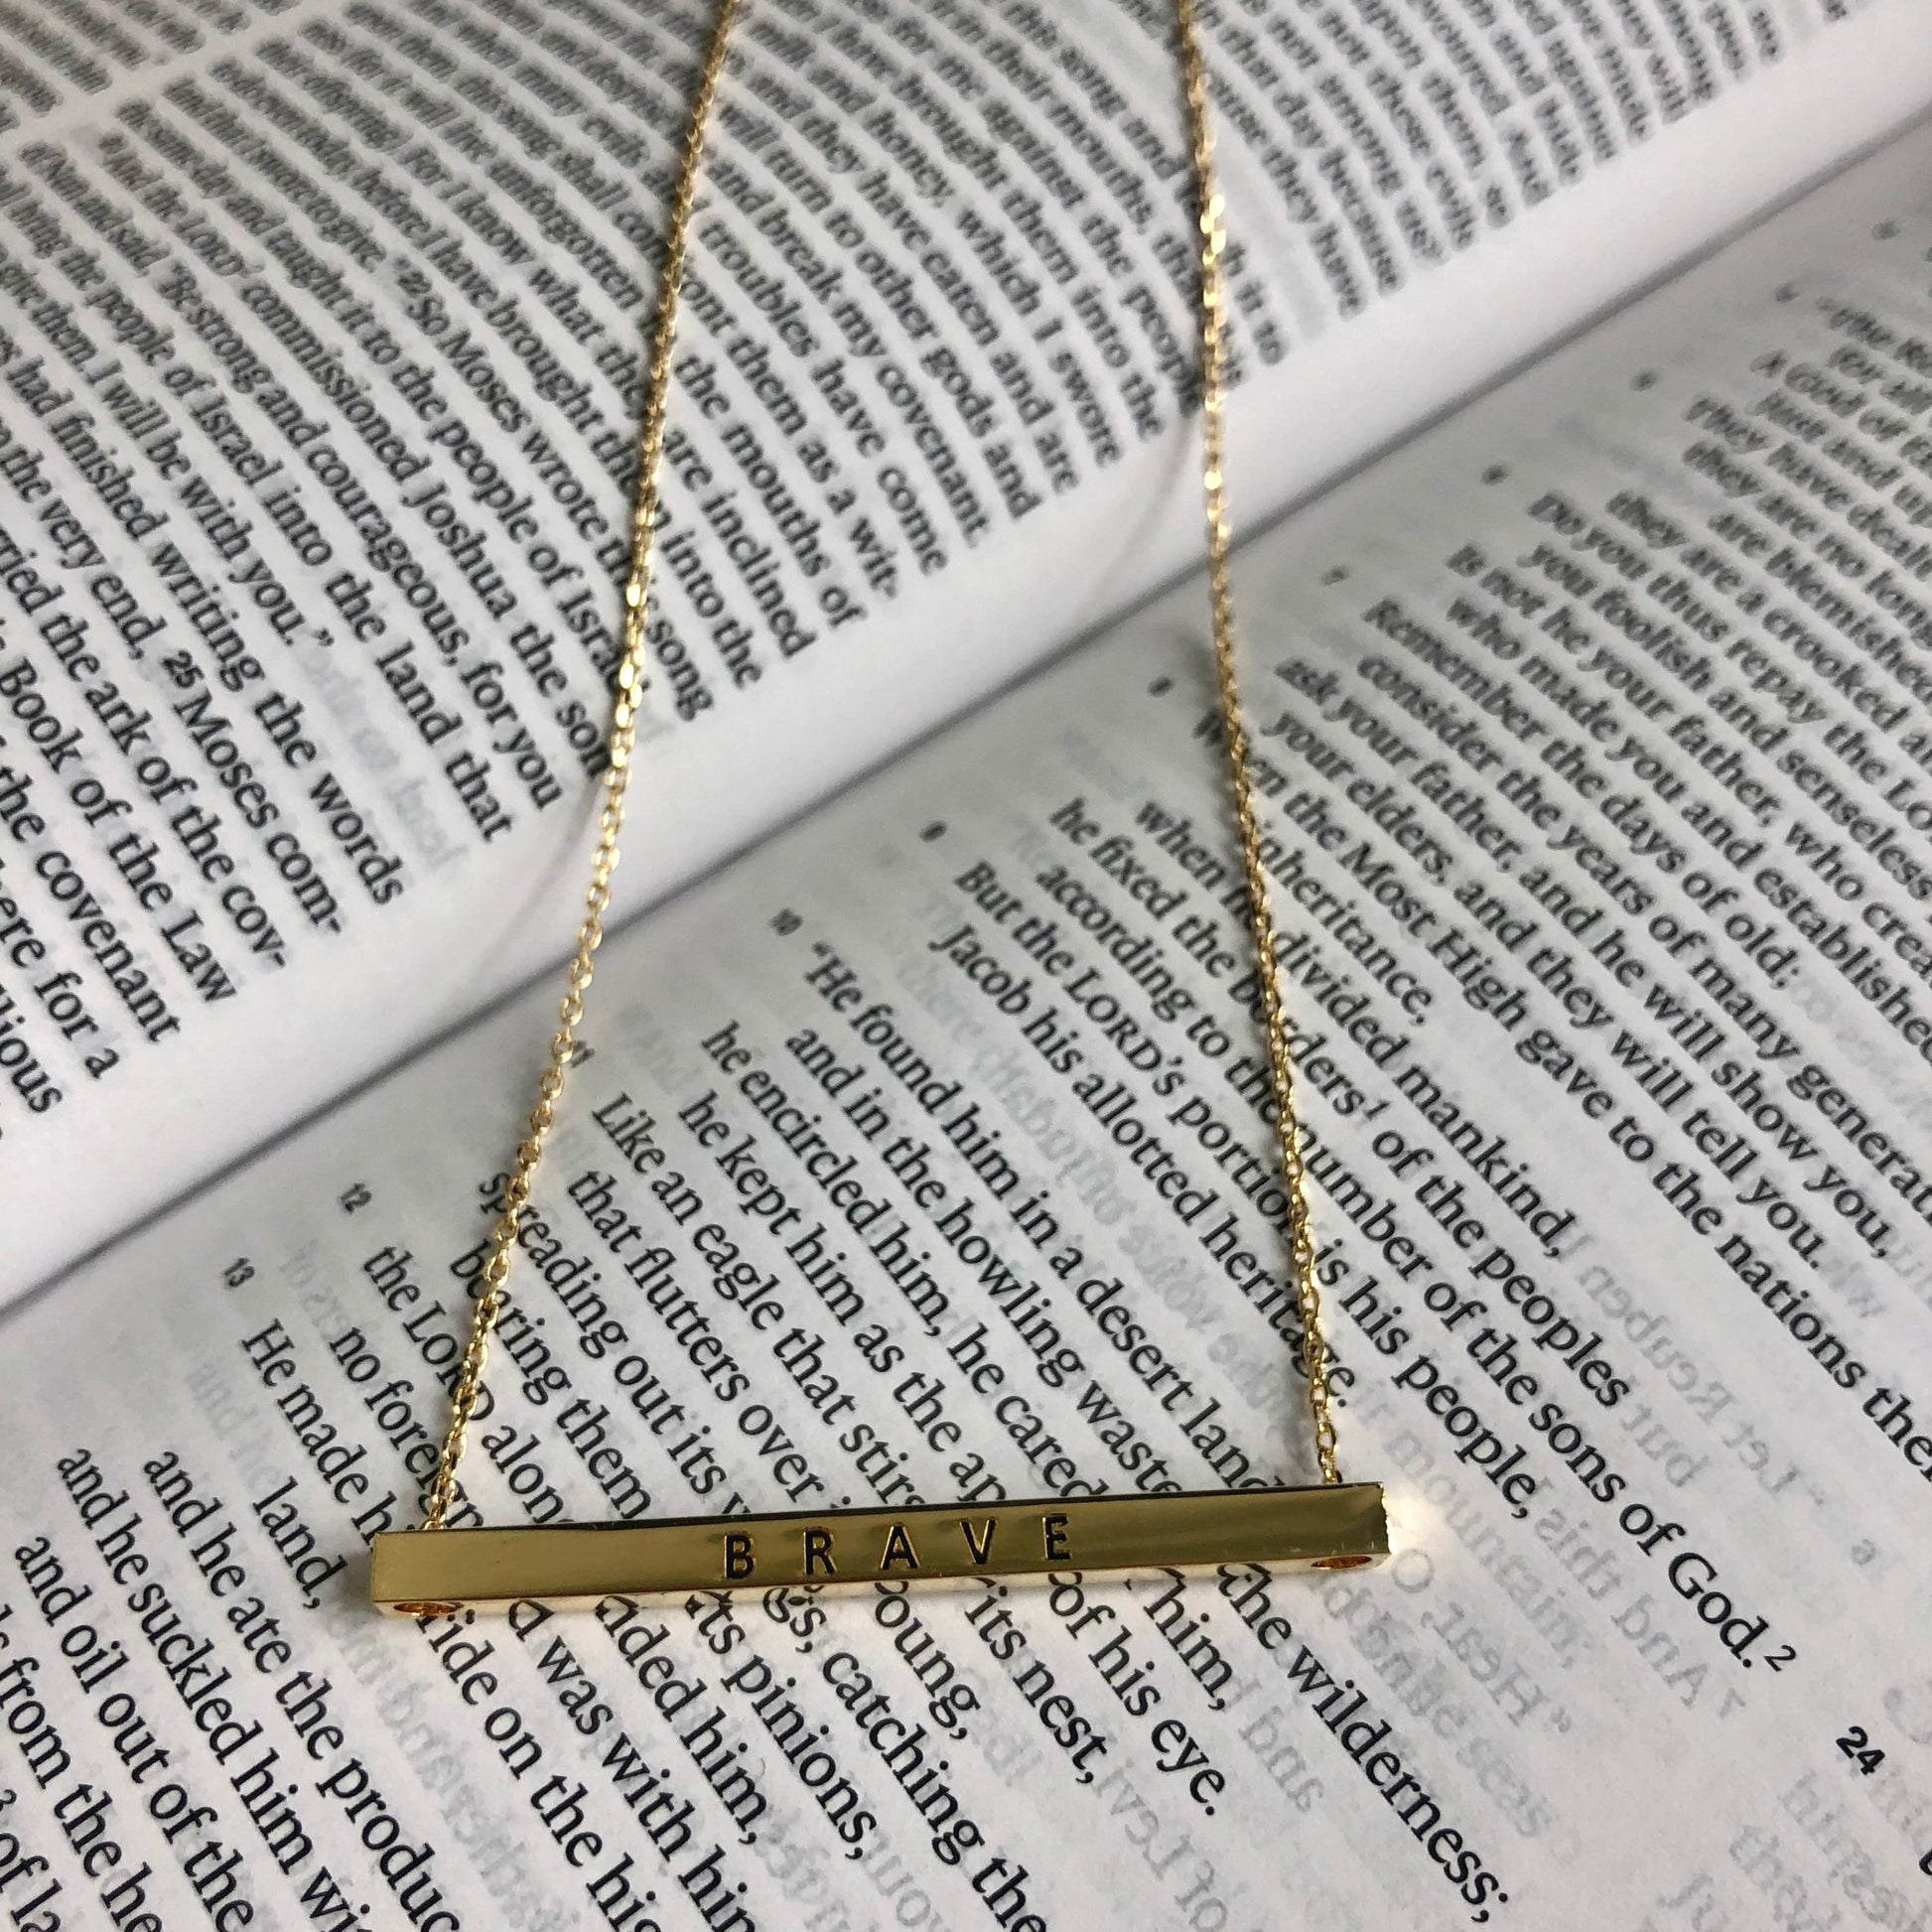 A gold bar necklace with the word "Brave" engraved on it